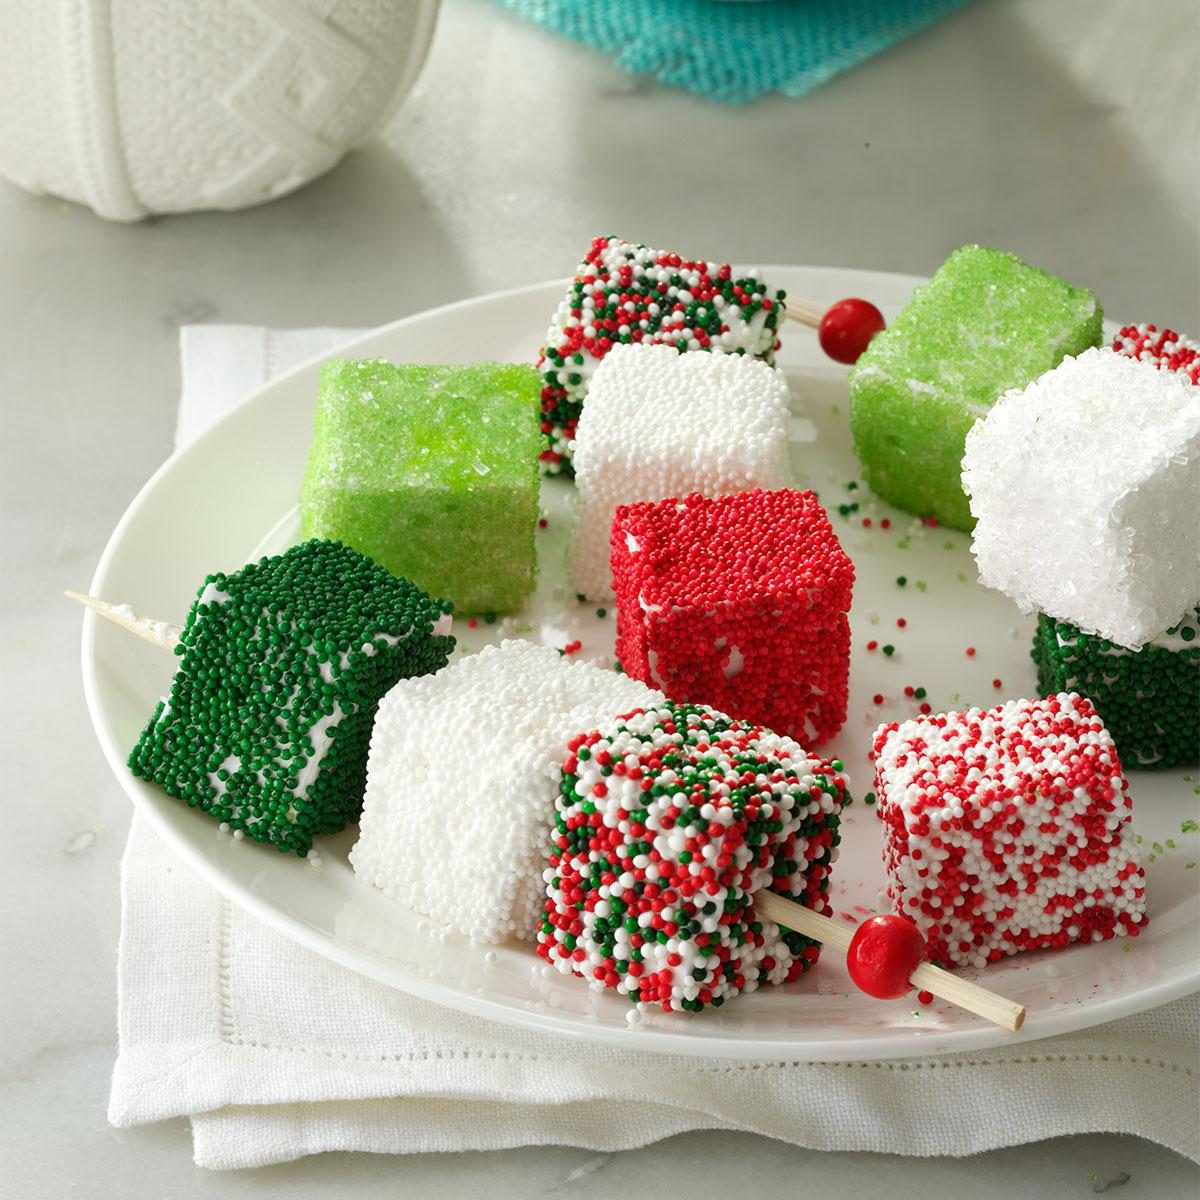 28 Homemade Christmas Candy Recipes - How To Make Your Own Holiday Candy